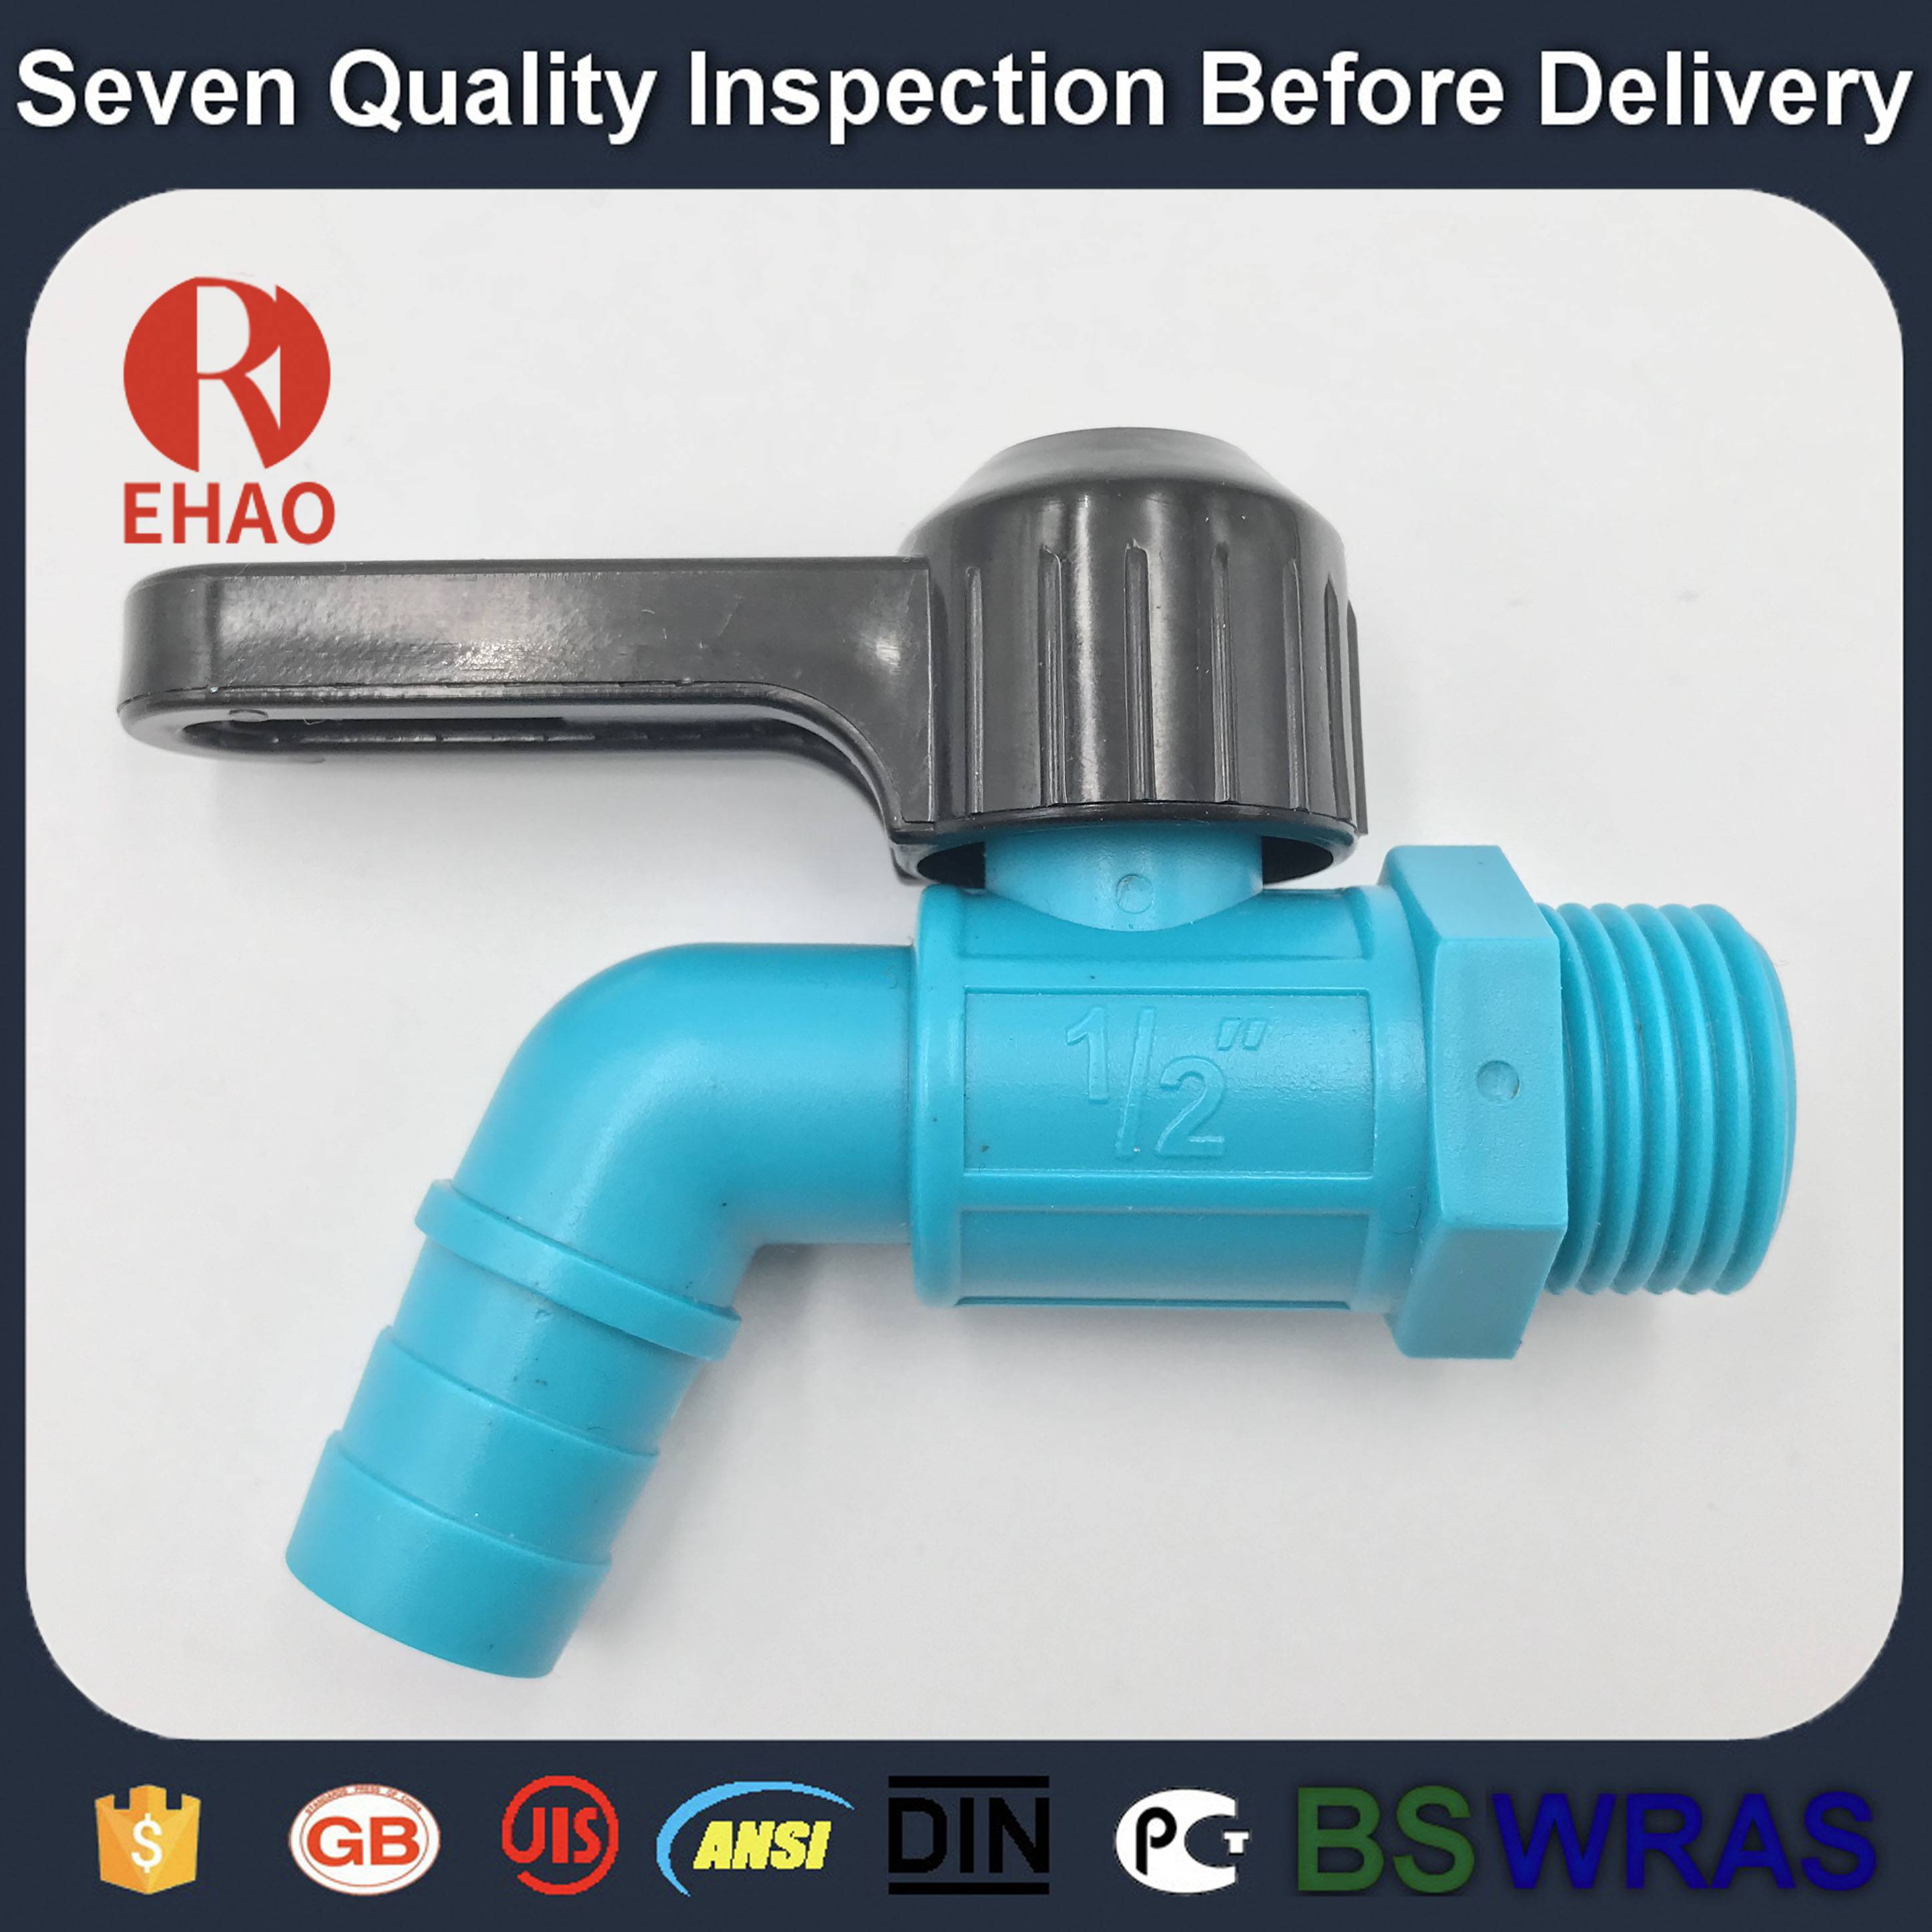 1/2” Upvc tap for garden and bibcock for water supply with high quality